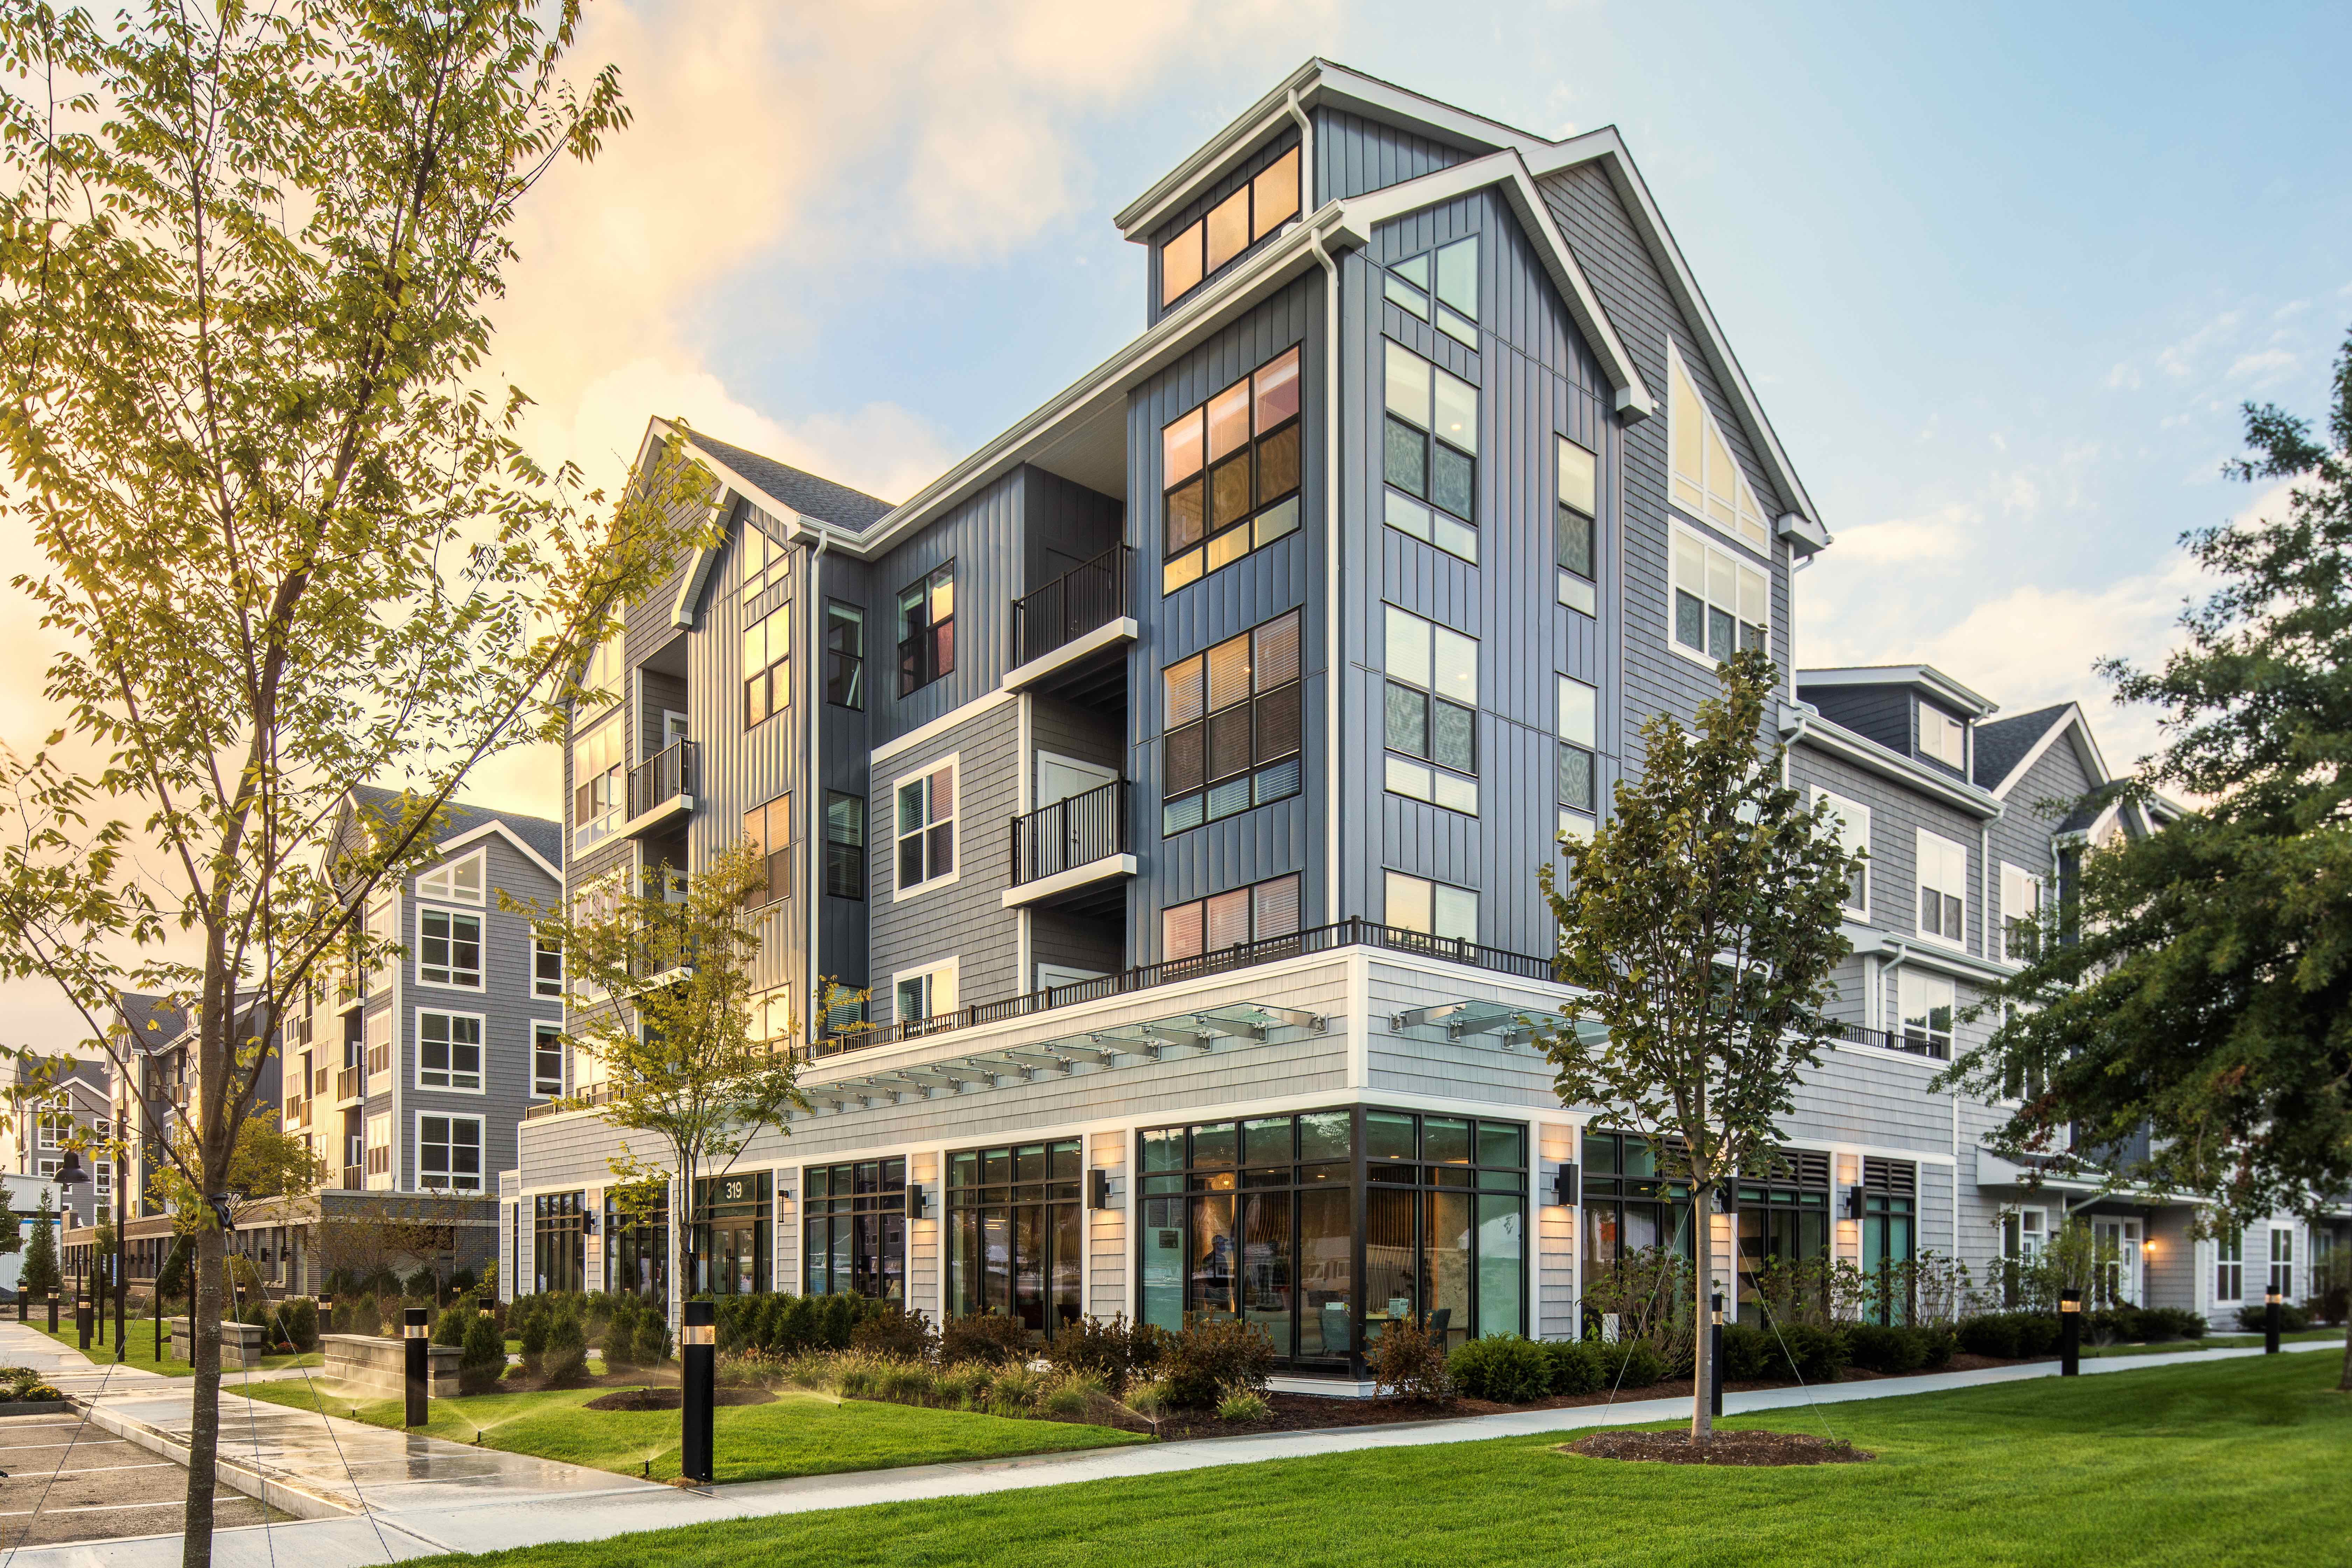 TAT has a longstanding reputation as a national expert in multifamily housing design, including for project's like AvalonBay's Avalon Residences at the Hingham Shipyard (Photo Credit: Camille Maren)